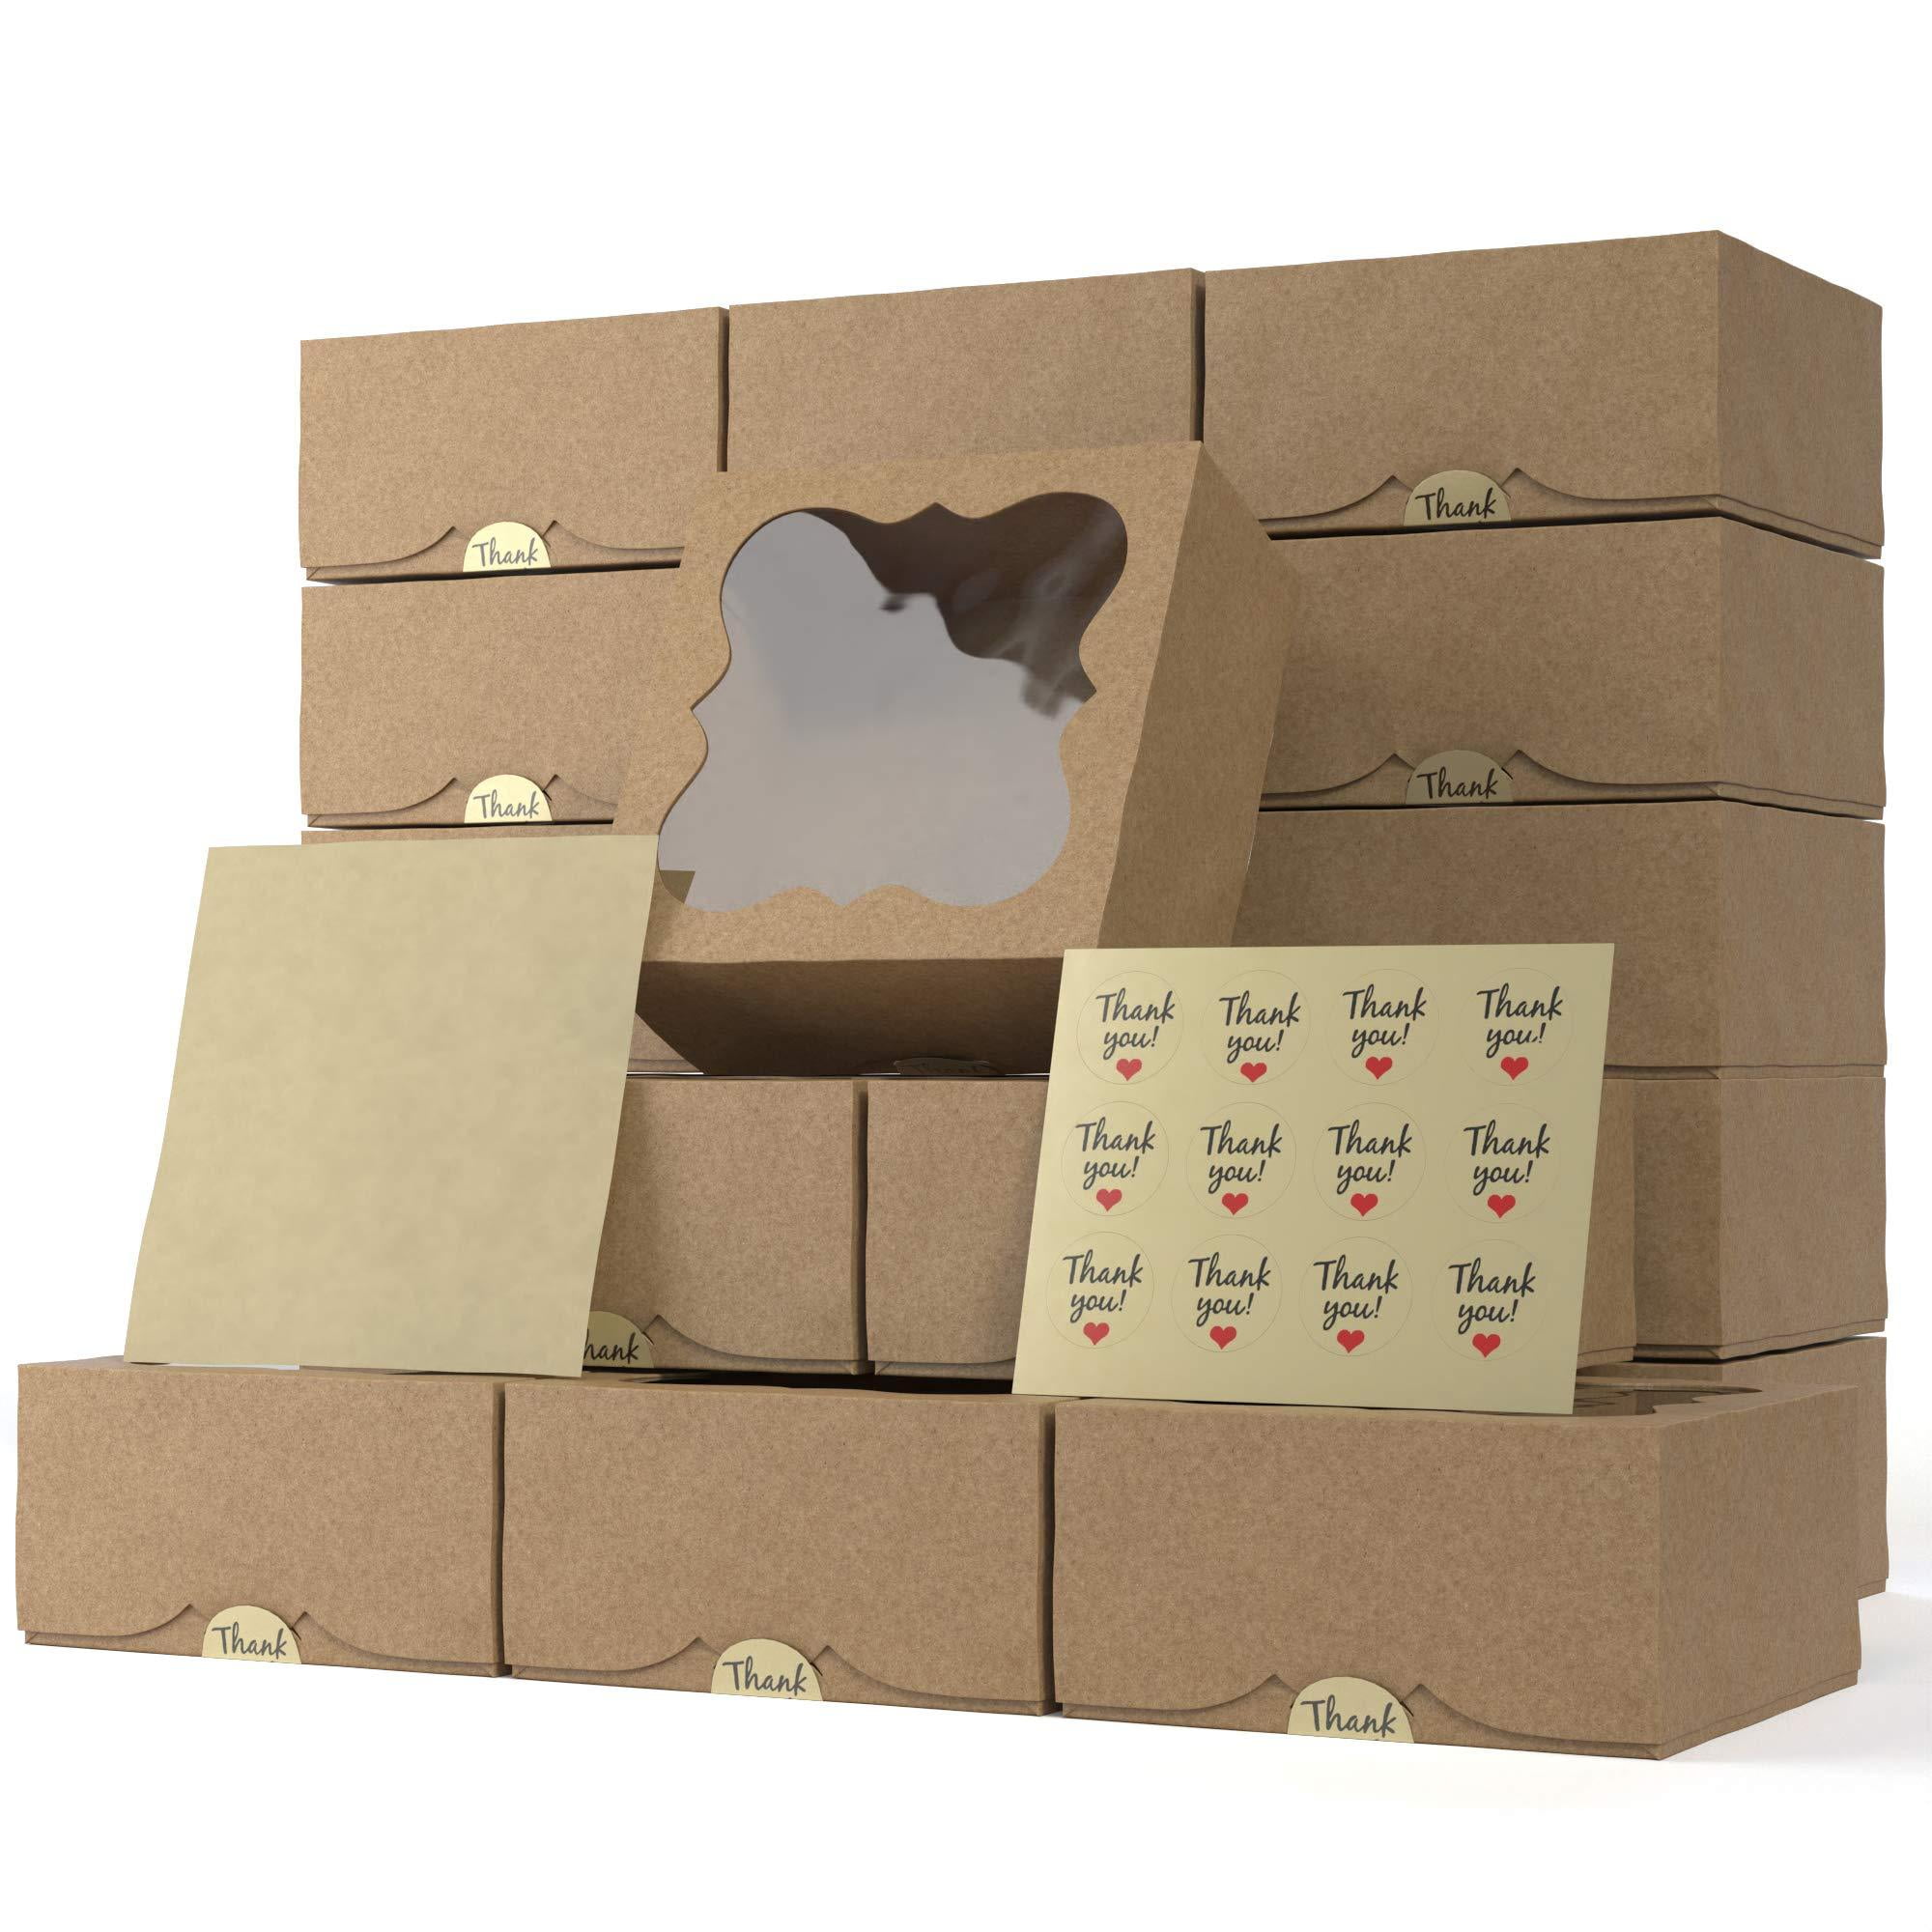 Brown, 25 Colovis Bakery Boxes with Window Pastries 25pcs 8x6x2.5 Inches Pastry Treat Boxes for Packaging Cookies Chocolate Strawberries 